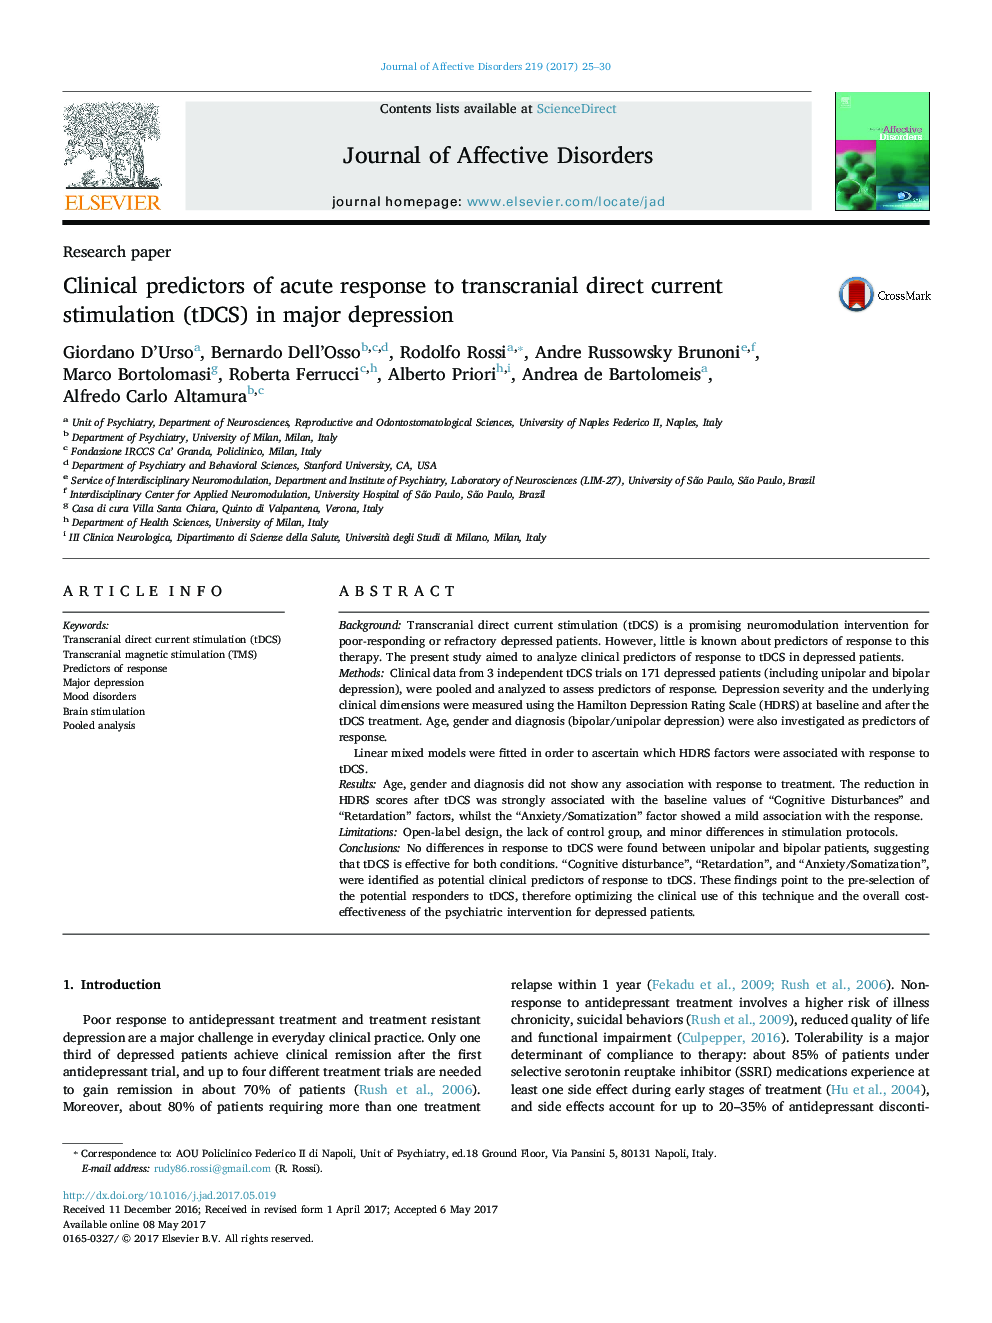 Research paperClinical predictors of acute response to transcranial direct current stimulation (tDCS) in major depression